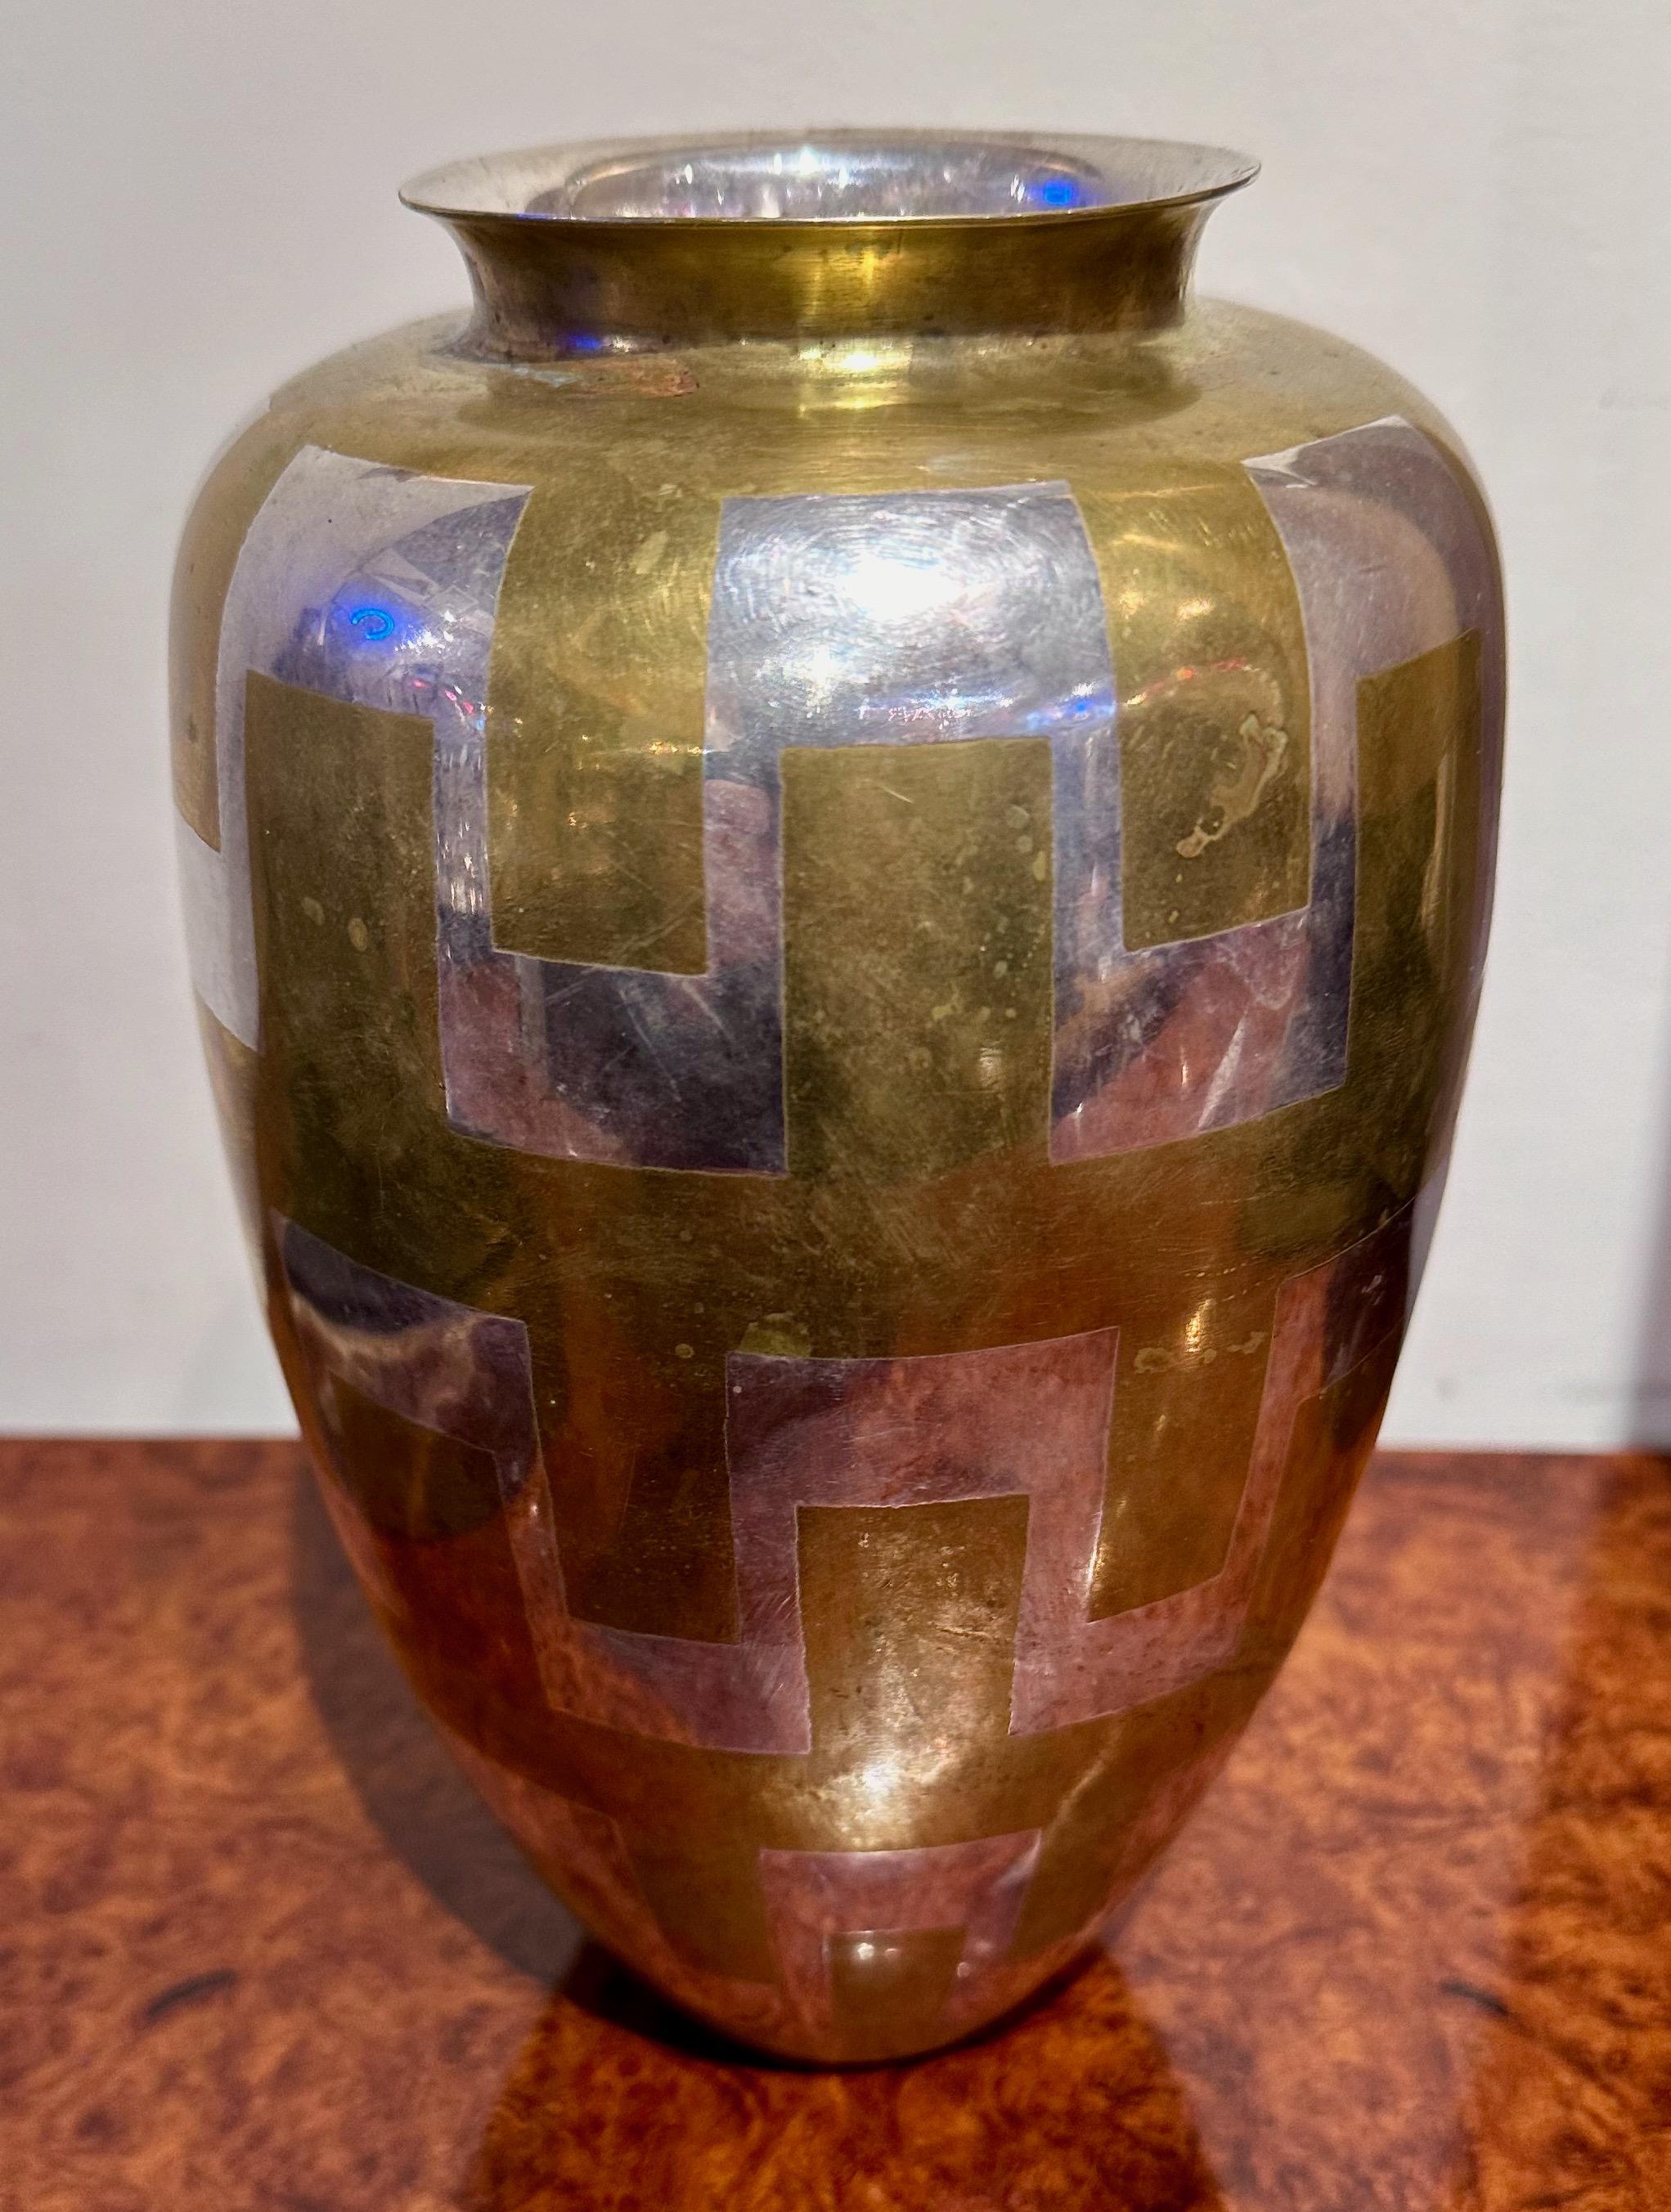 The Christofle Metal Vase, designed by Luc Lanel circa 1925, is a notable piece of Art Deco design. Luc Lanel was a French designer closely associated with the Art Deco movement. He worked for the prestigious French luxury company Christofle, known